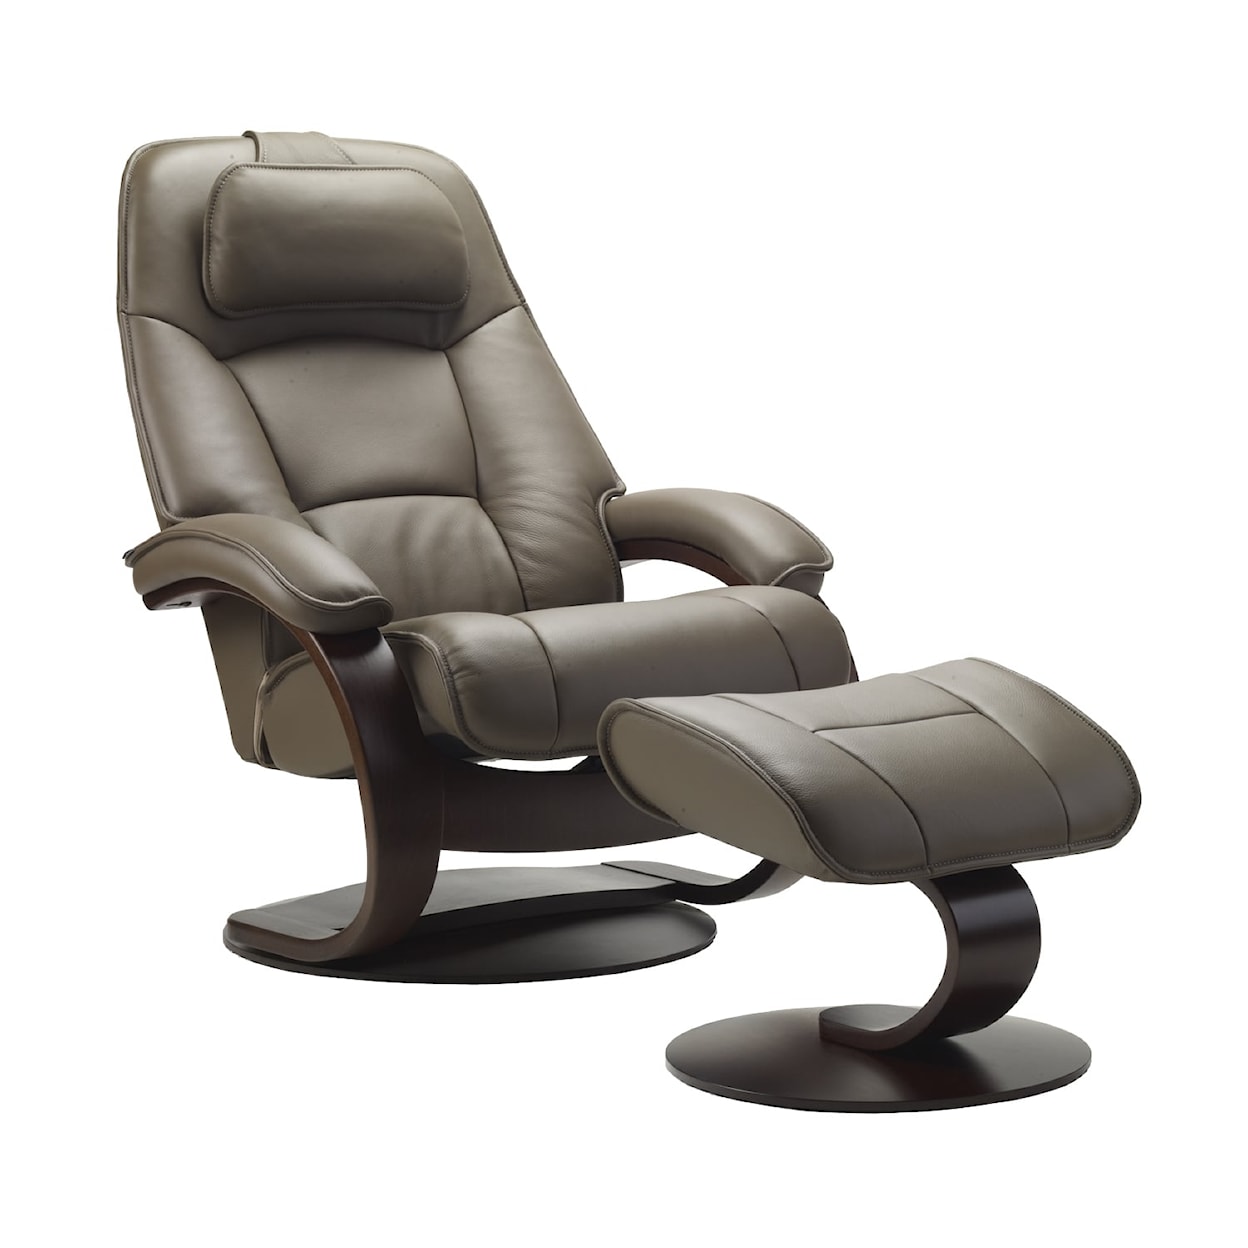 Fjords by Hjellegjerde Classic Comfort Collection Admiral C Large Manual Recliner